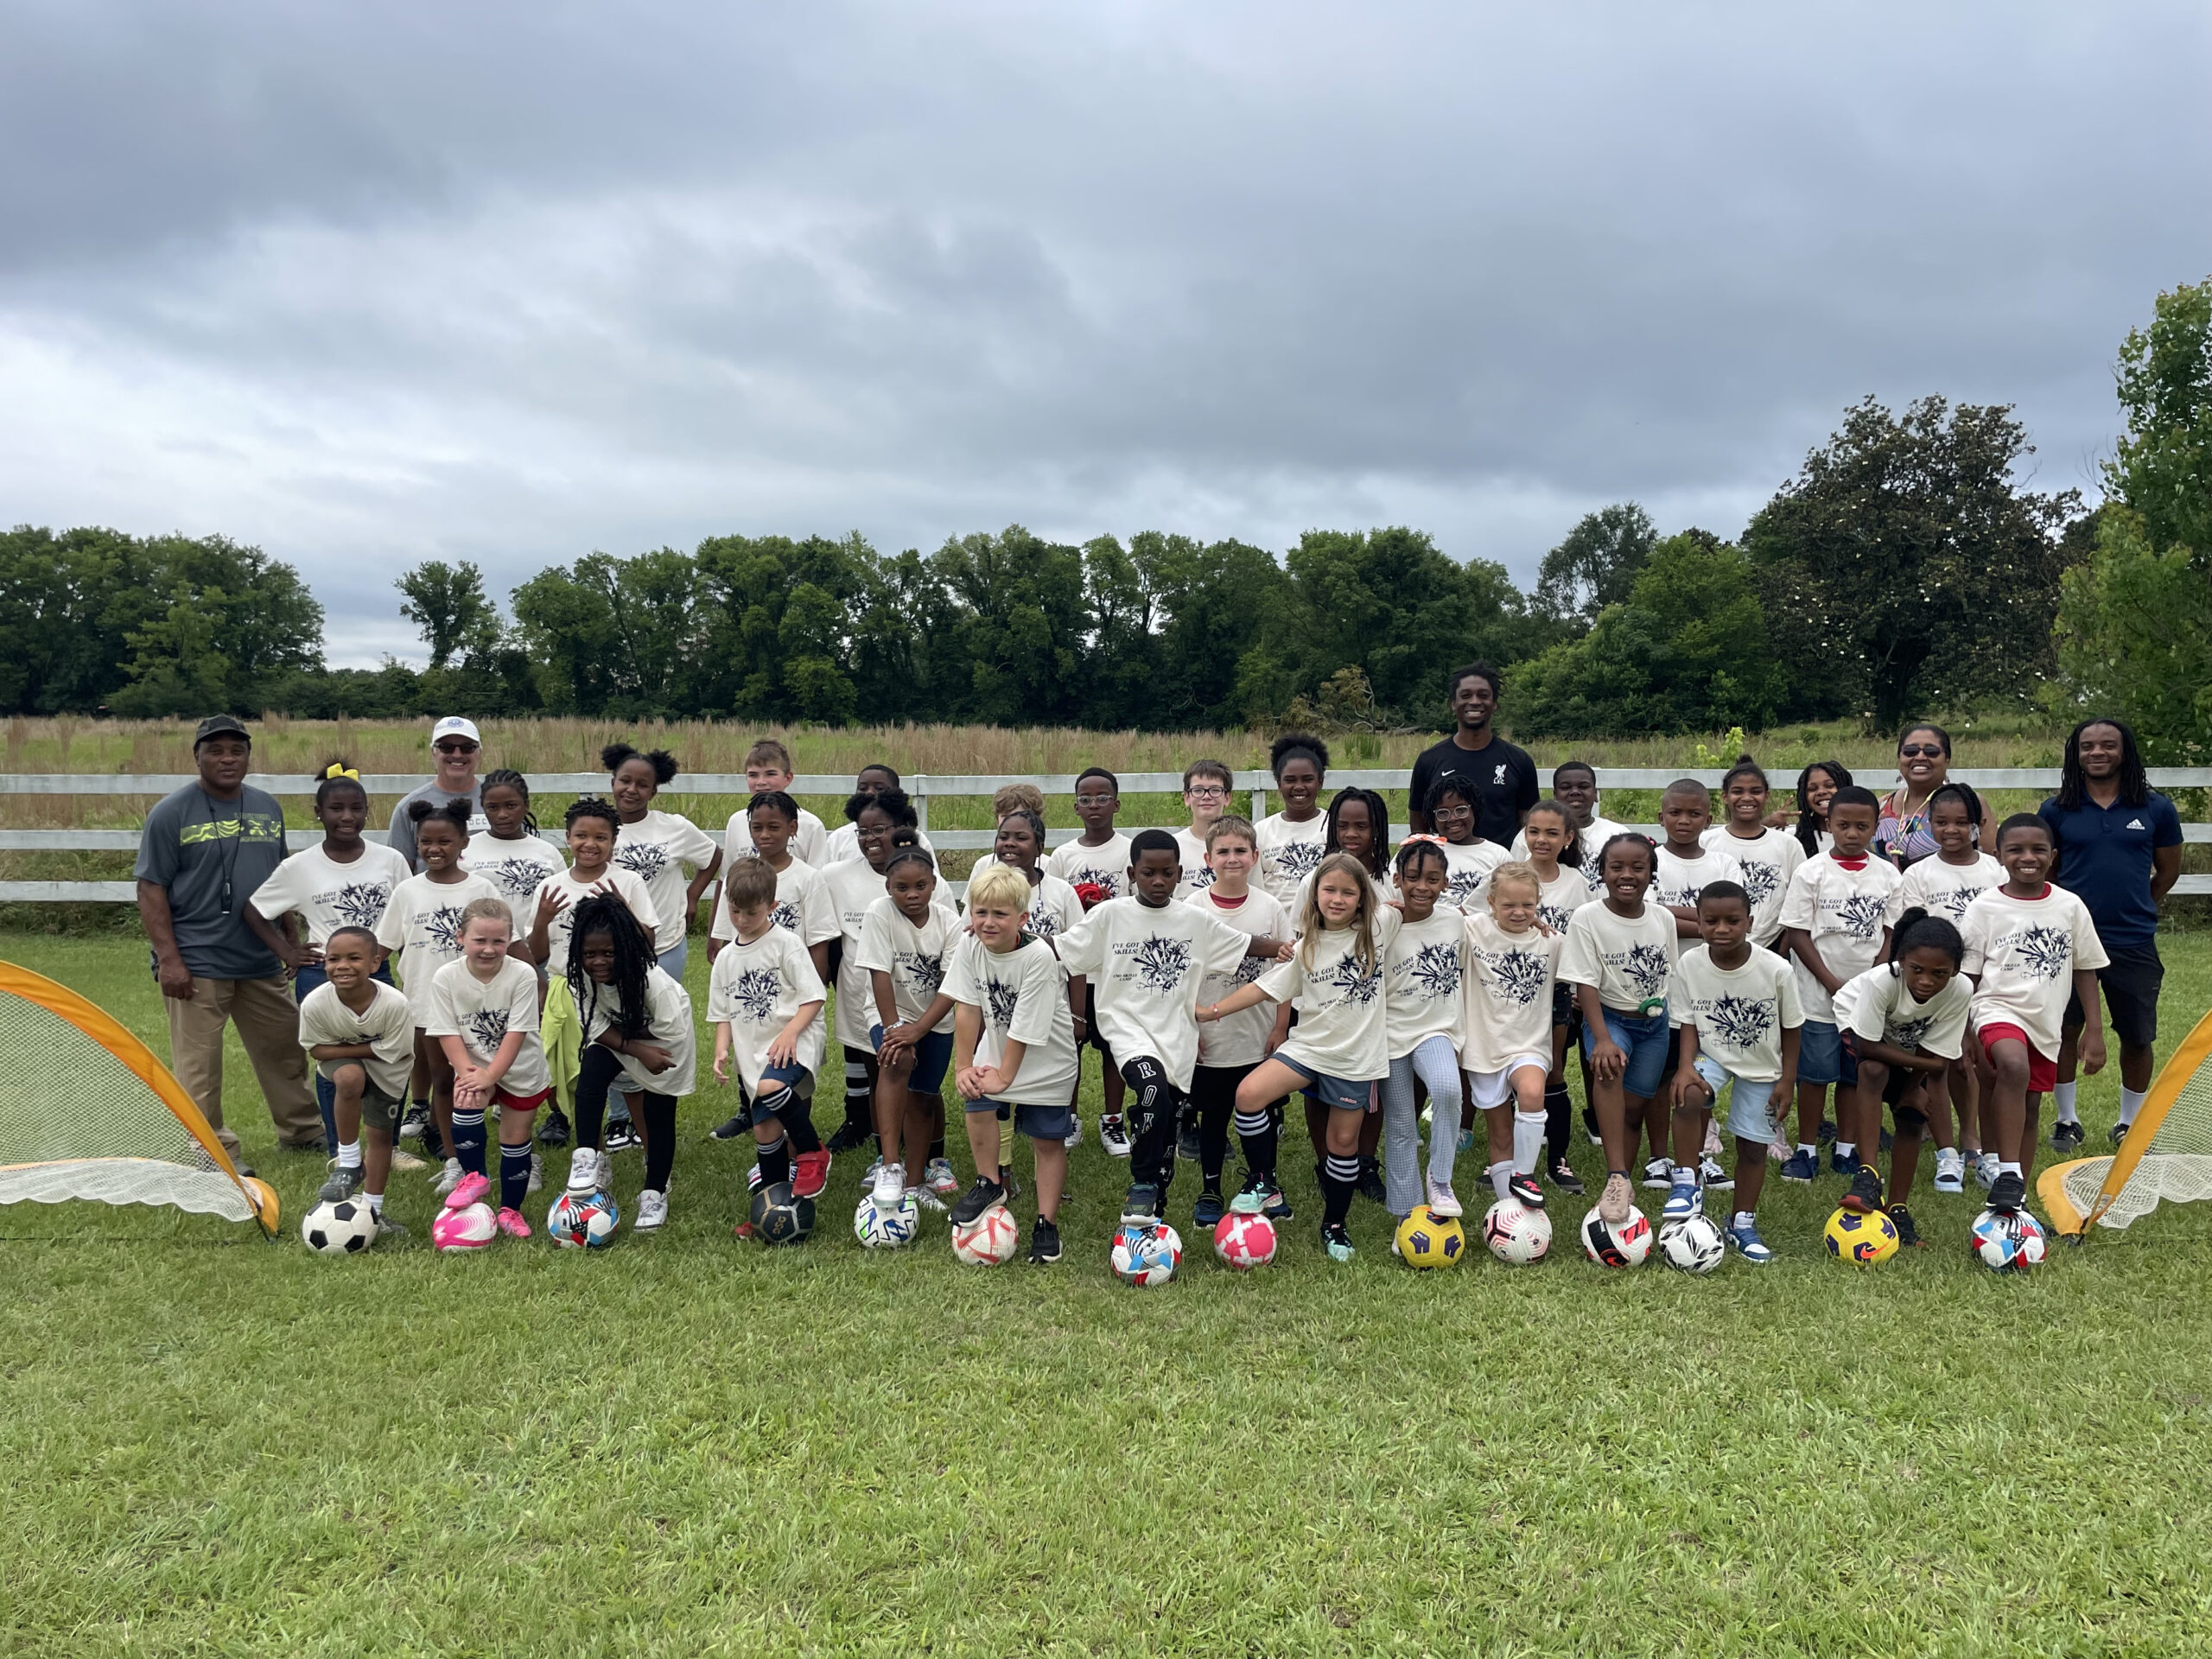 Columbus Soccer and Palmer Home team up for weeklong soccer camp The